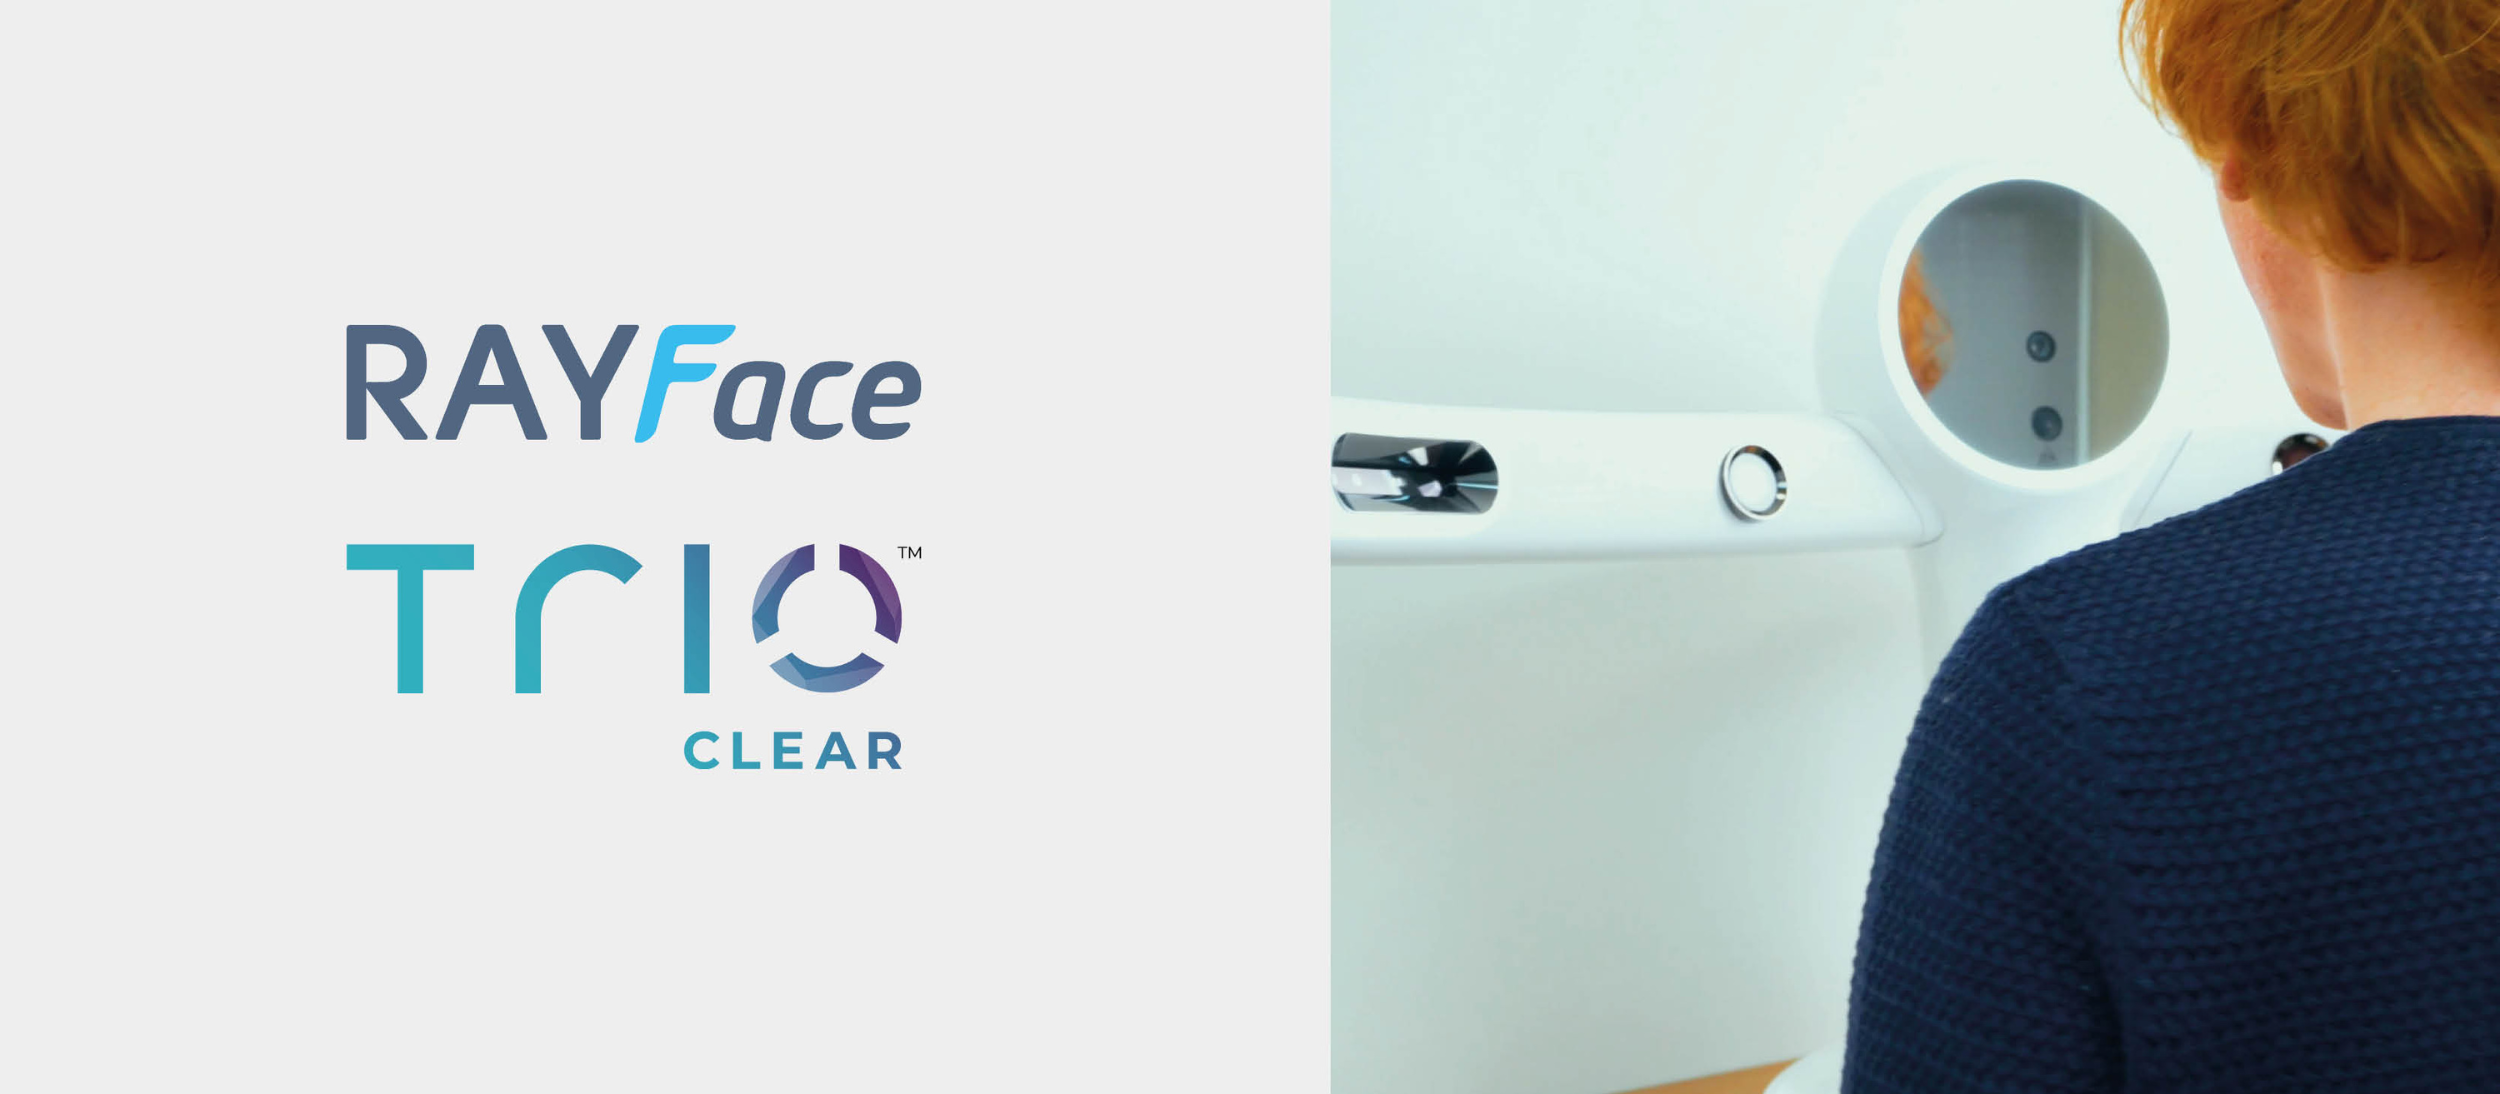 TrioClear™ iDesign 2.0 with RAYFace integration<br />
